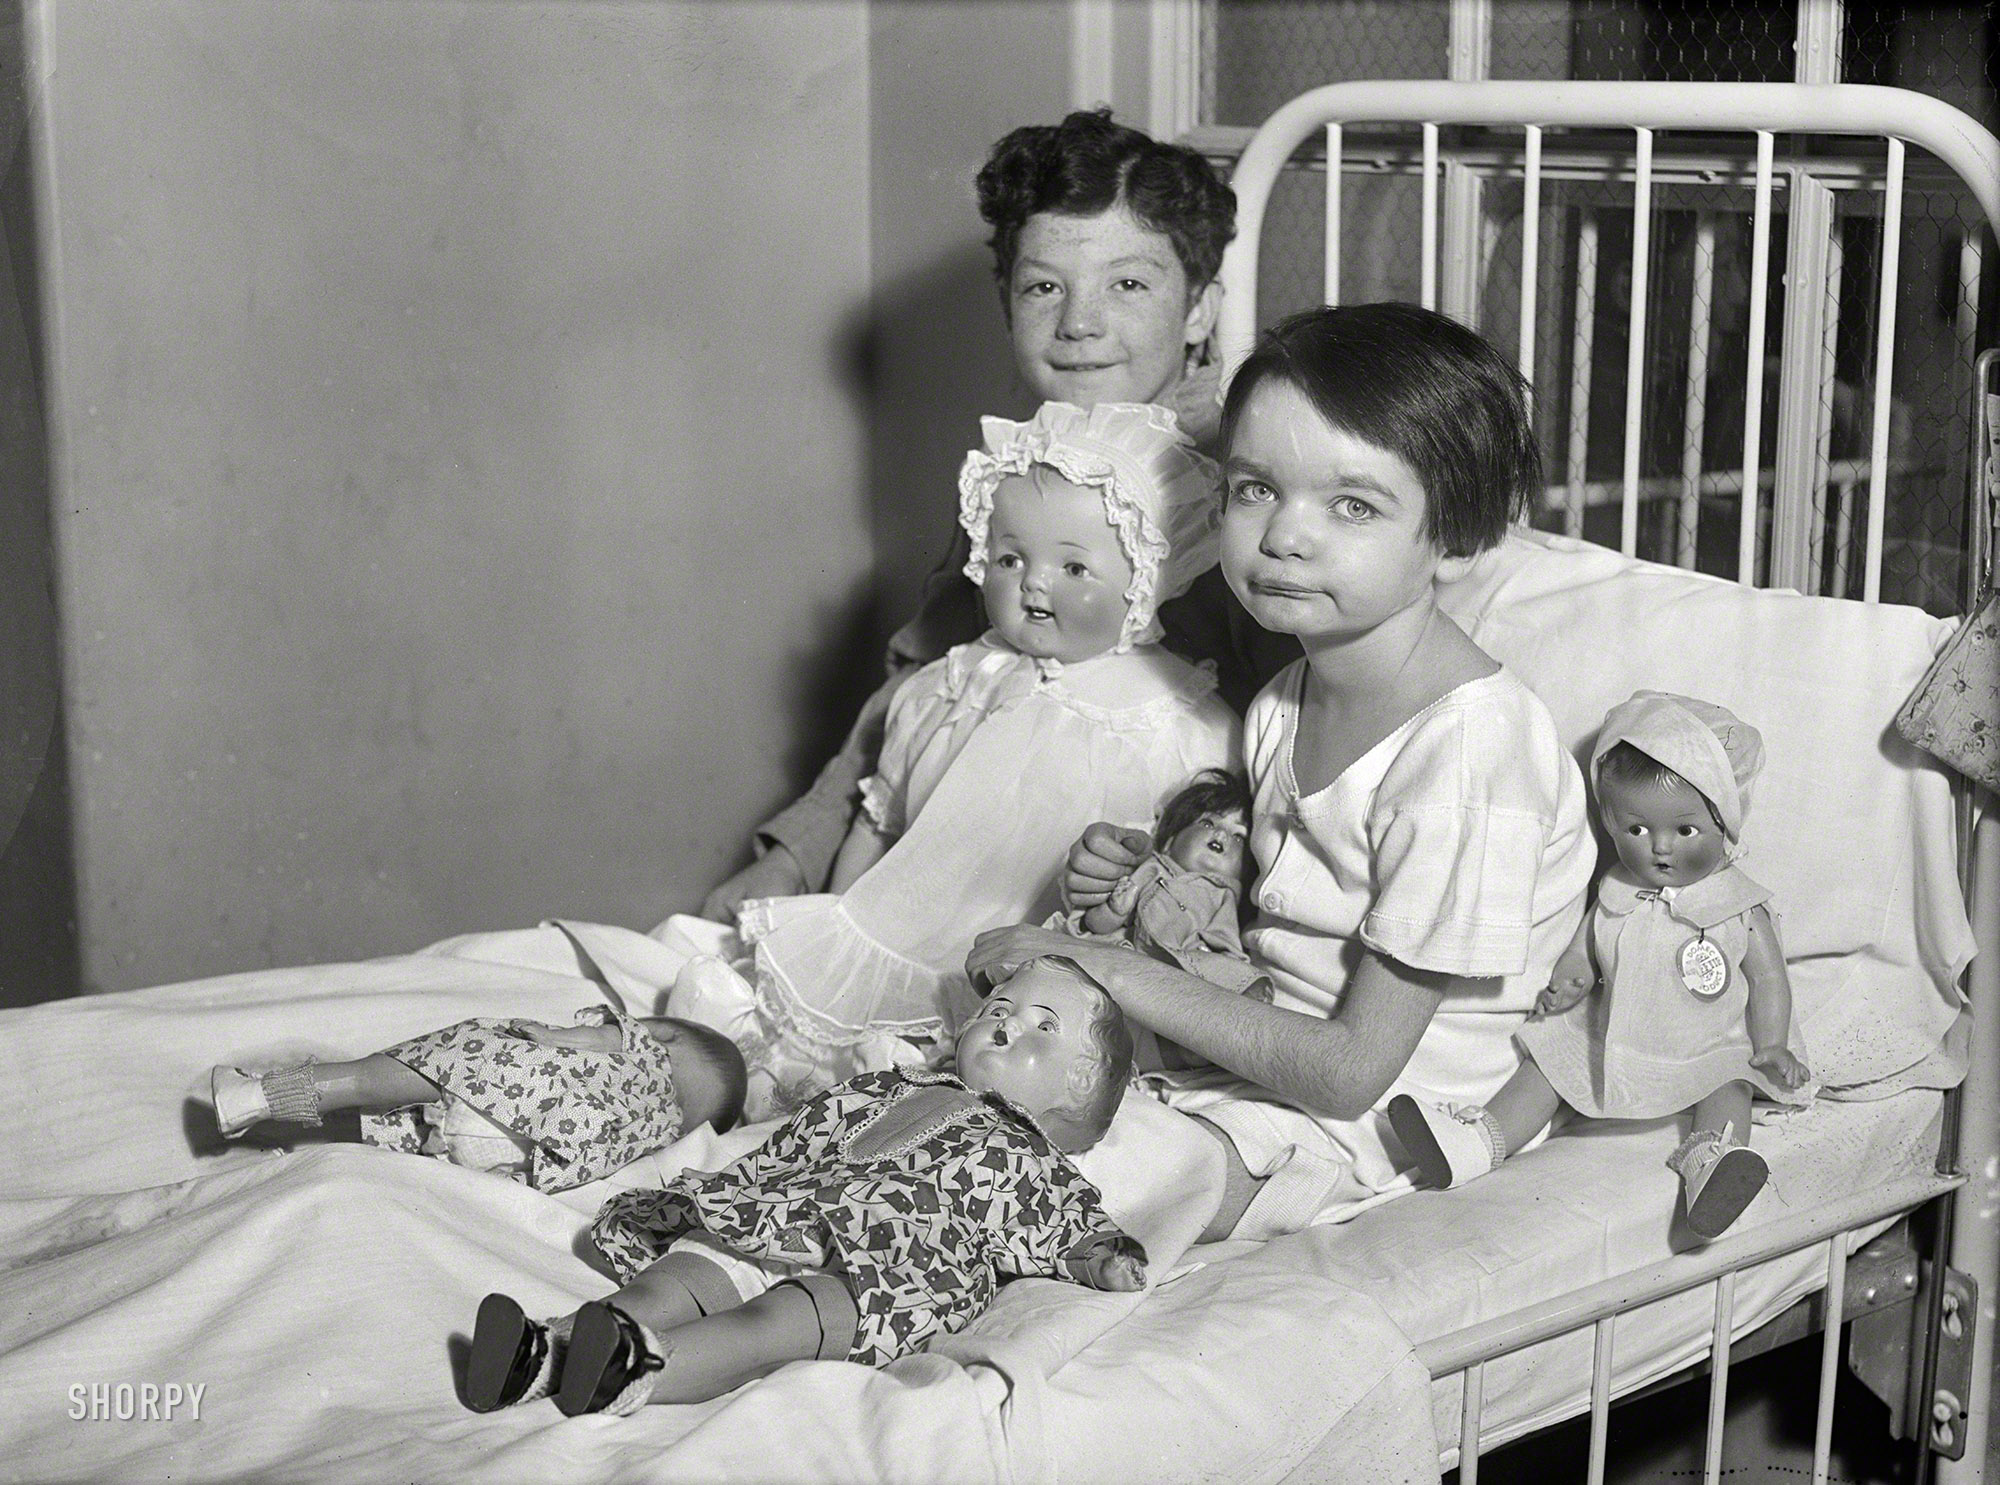 Washington, D.C., 1931. "Children in hospital bed with dolls." Retroactive wishes for a speedy recovery, kids. Harris & Ewing glass negative. View full size.